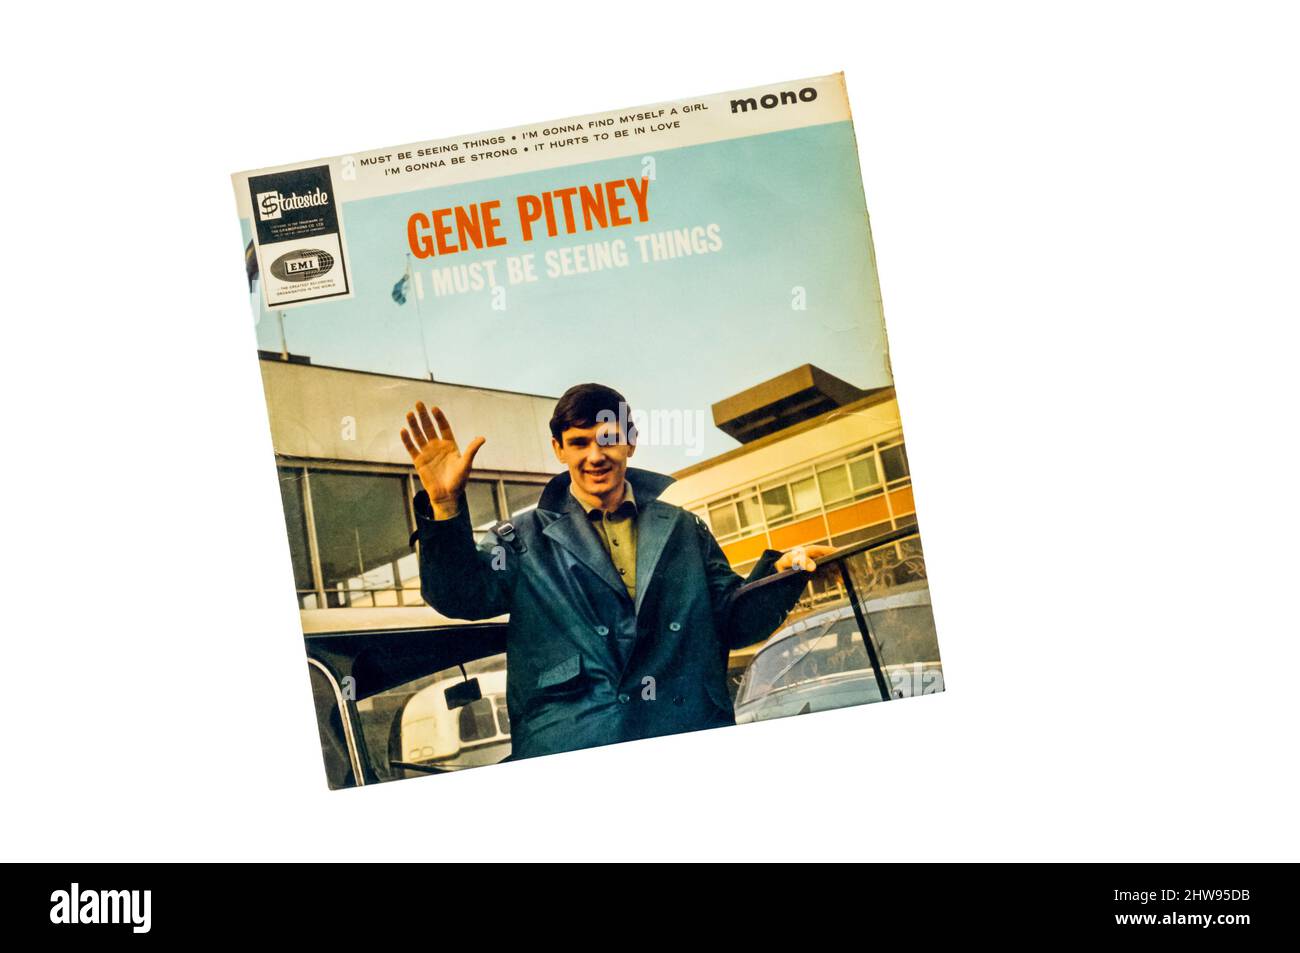 EP i must be SEE Things by gene Pitney rilasciato nel 1965. Foto Stock